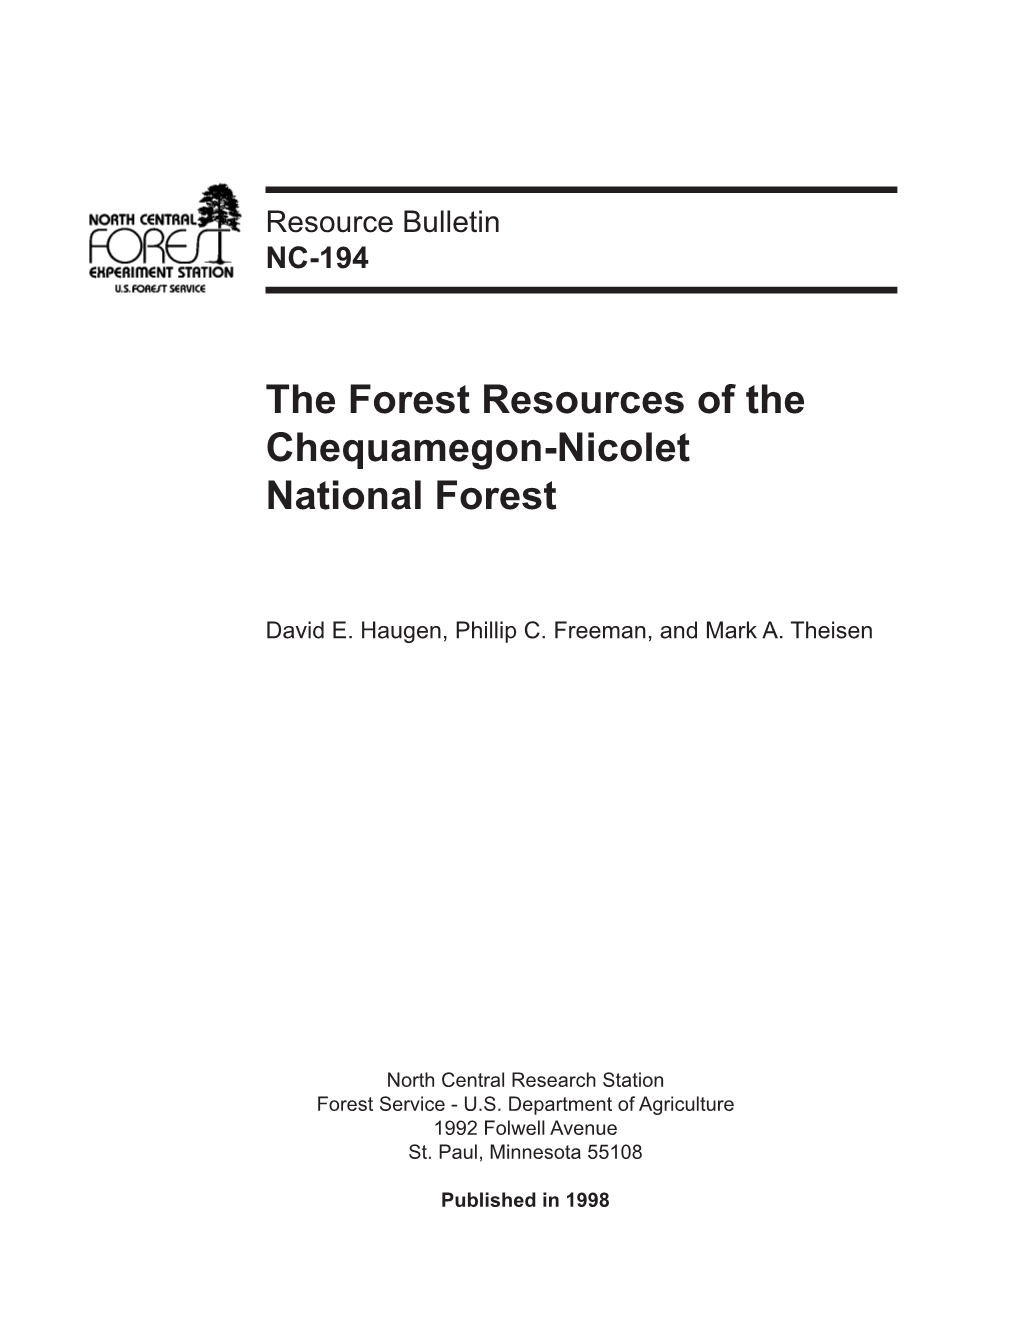 The Forest Resources of the Chequamegon-Nicolet National Forest